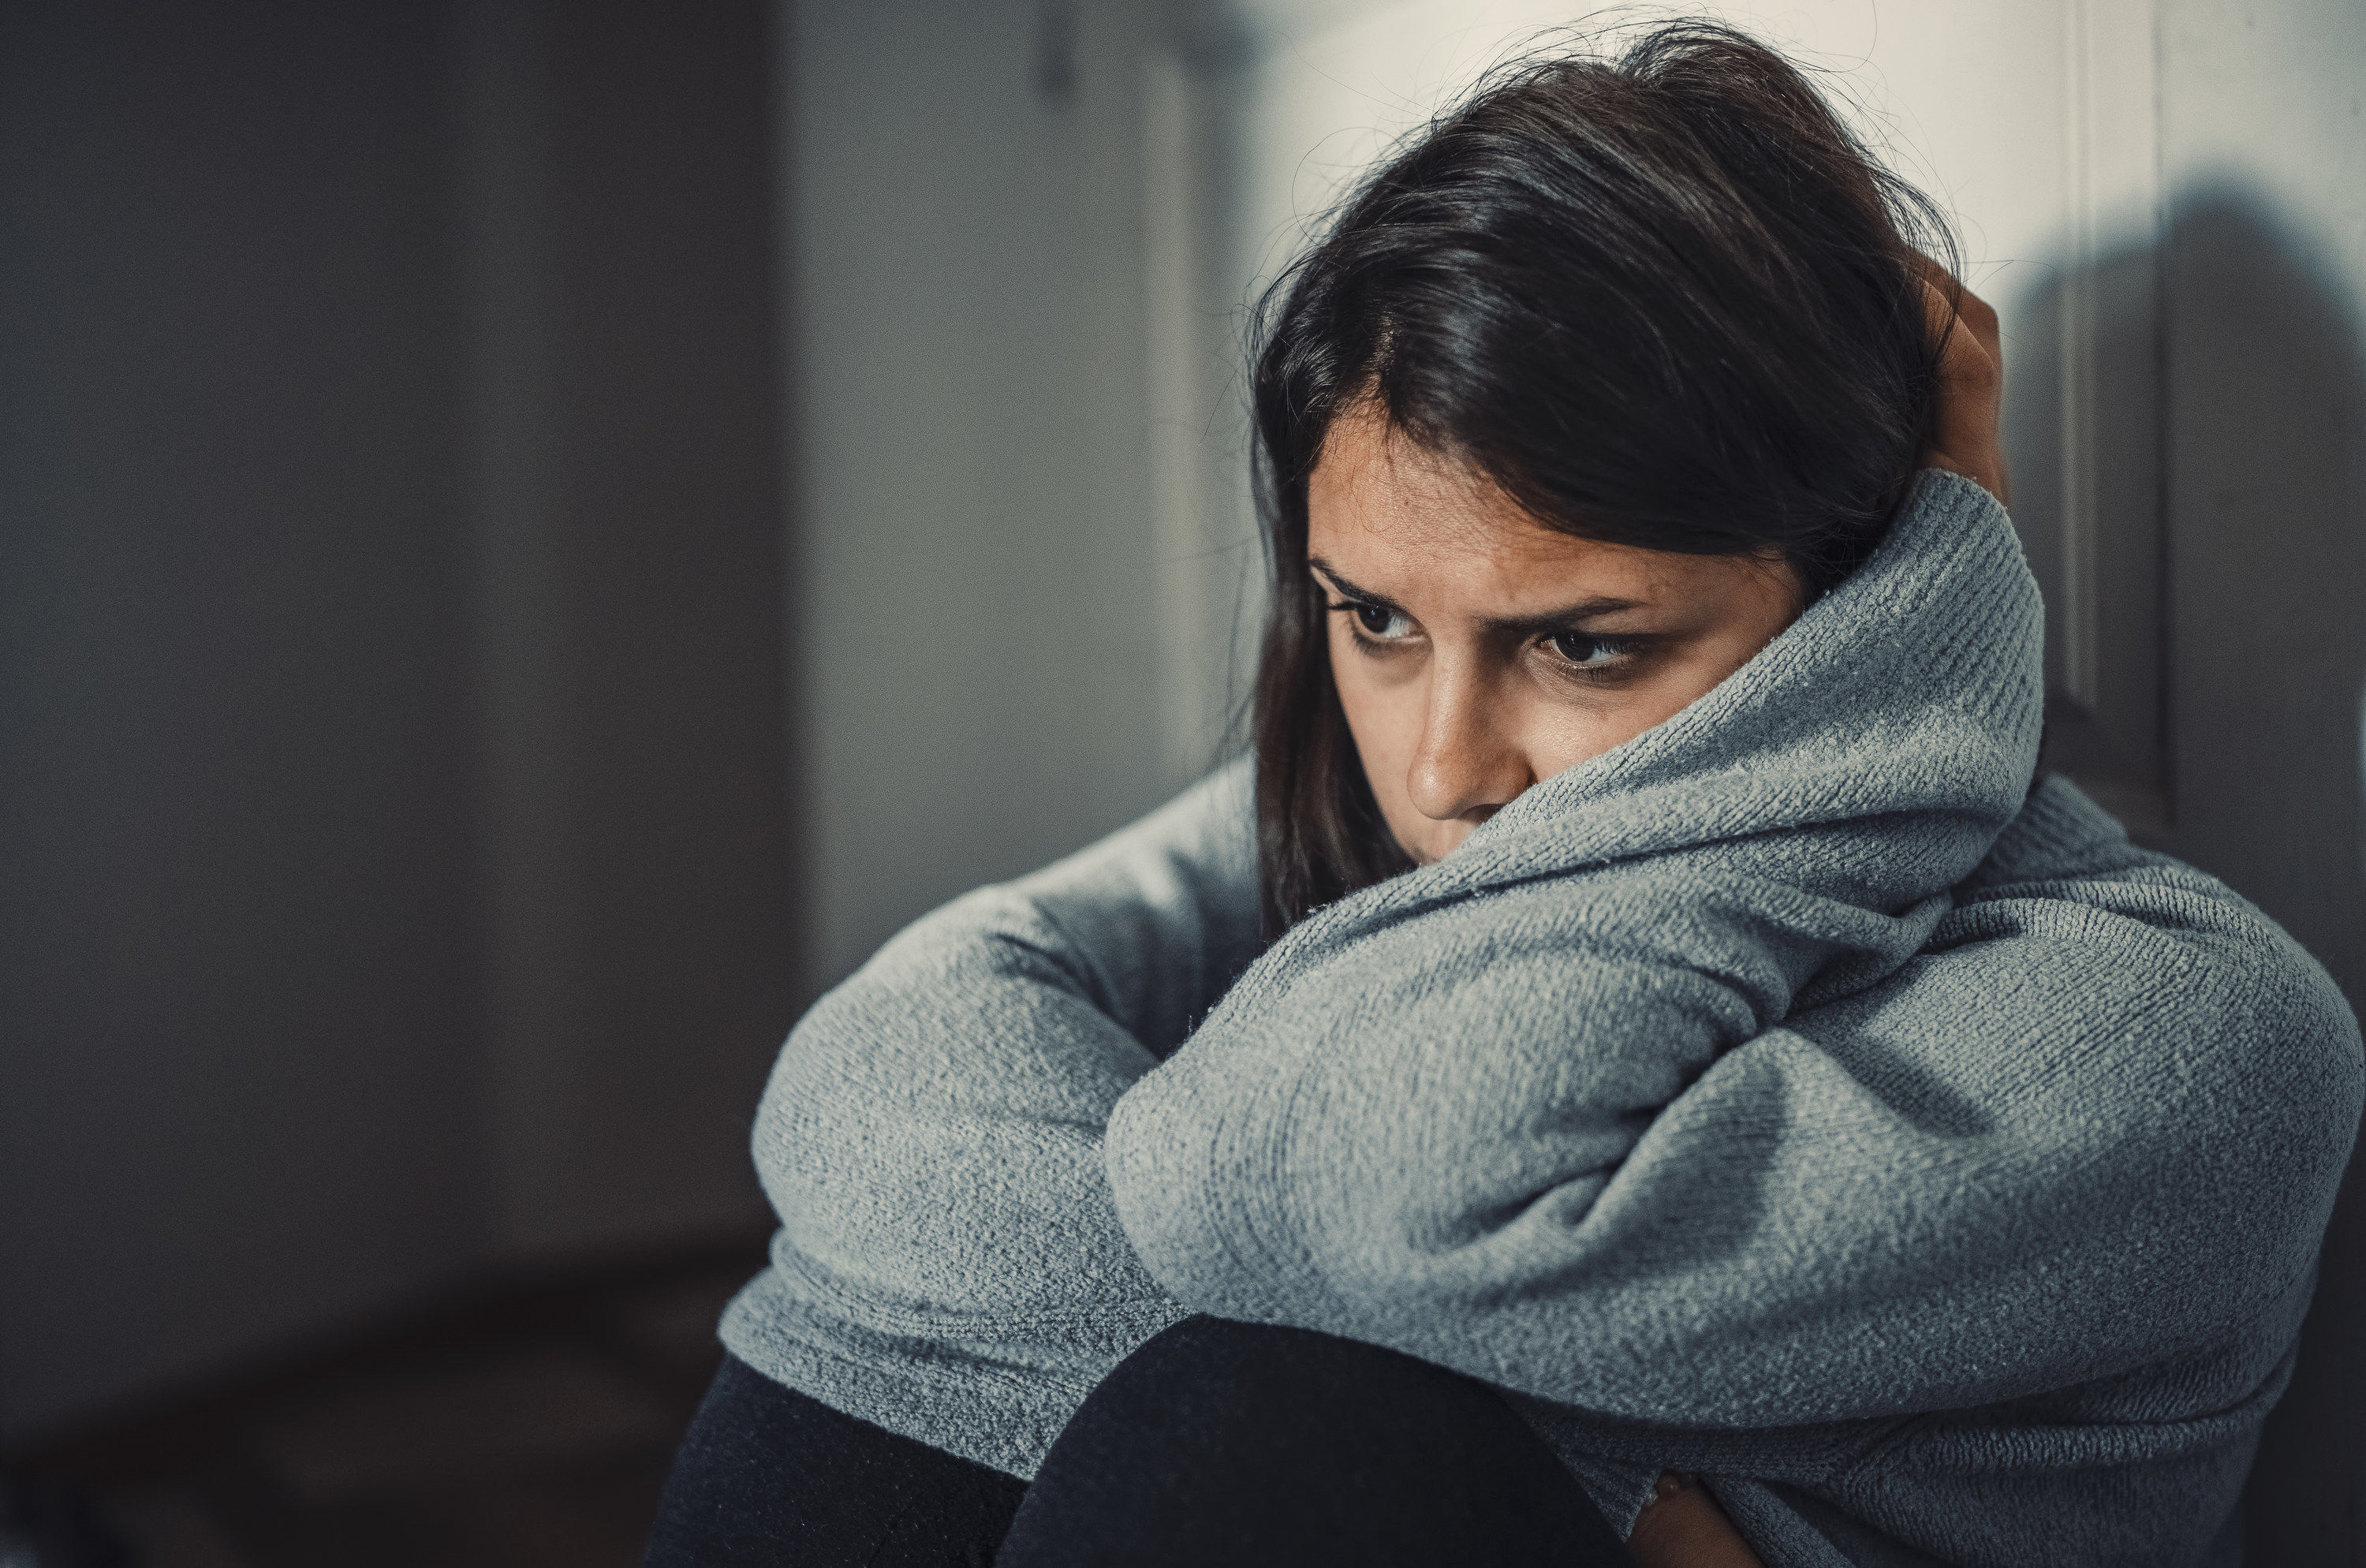 A woman sitting down looking sad with a sweater on